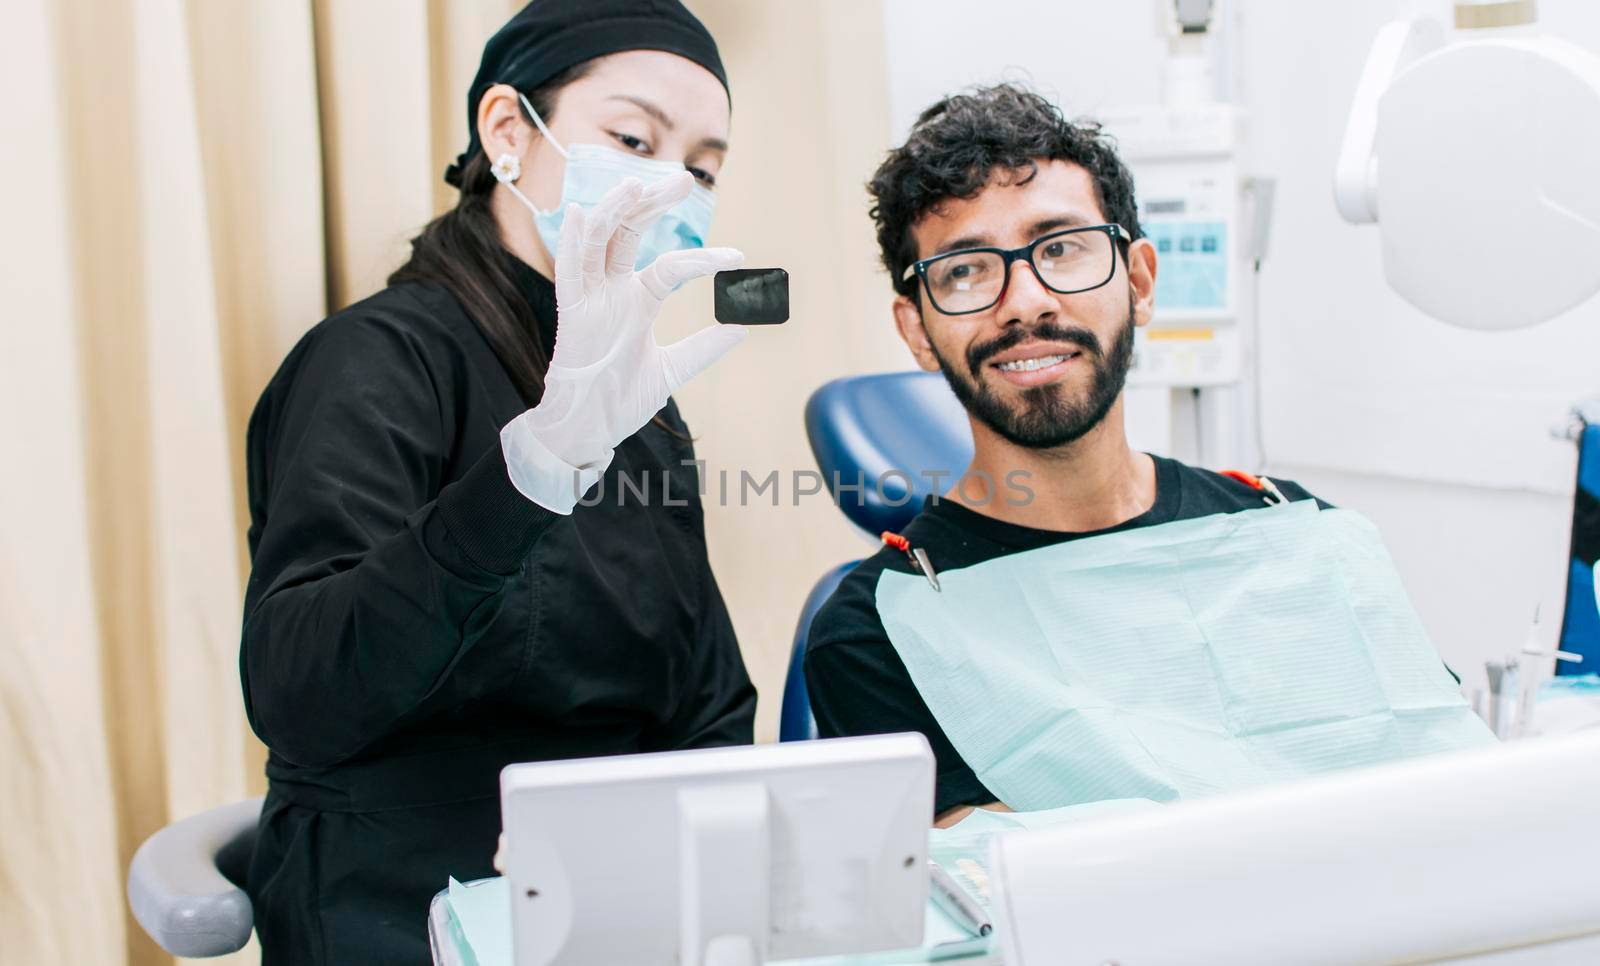 Dentist with patient showing him a periapical x-ray, View of dentist with patient reviewing dental x-ray. Dentist showing periapical x-ray to patient